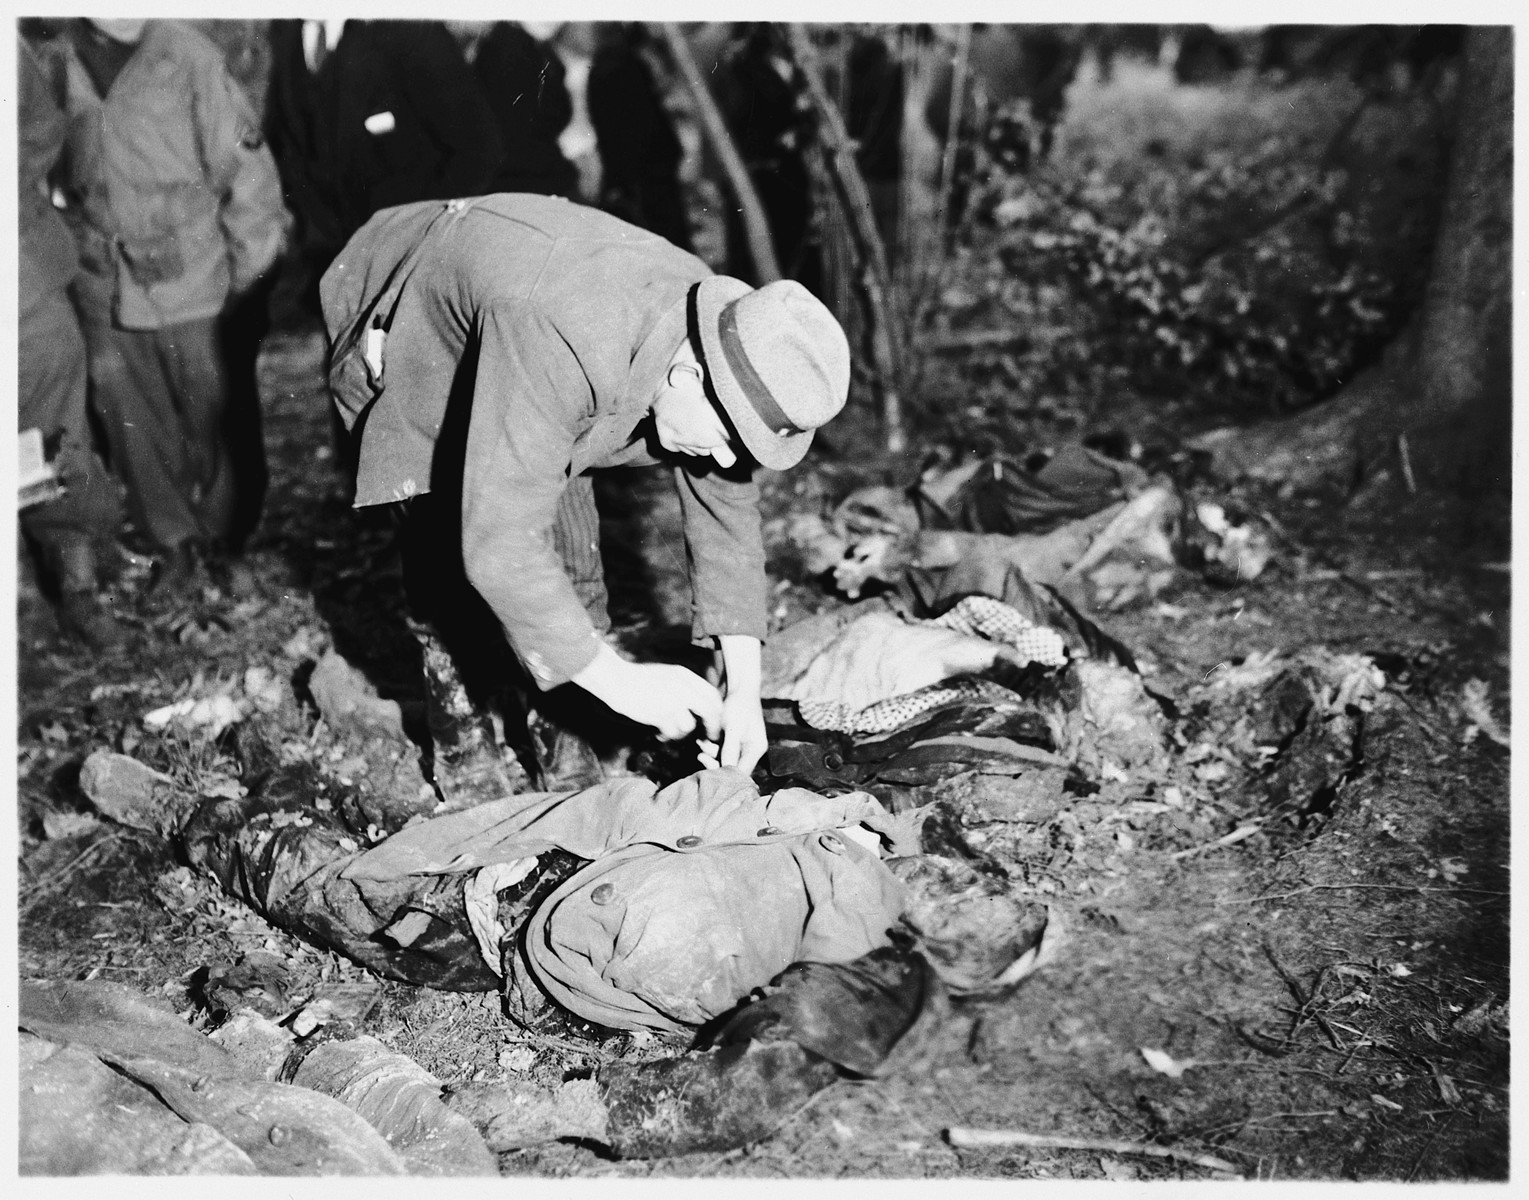 A man looks for identification papers on one of the 57 corpses of Russians, including women and one baby, exhumed from a mass grave near Suttrop.  

The victims were forced to dig their own grave and then were shot by SS troops six weeks before the arrival of American troops.  On May 3, 1945, the 95th Infantry Division of the U.S. Ninth Army arrived in Suttrop and were informed by locals of the mass grave.  American troops forced the townspeople to exhume the grave after which Russian displaced persons in the area identified the bodies.  The victims were reburied in individual graves, and a U.S. Army chaplain conducted burial services.  Russians remaining in the area placed wreaths on the graves.